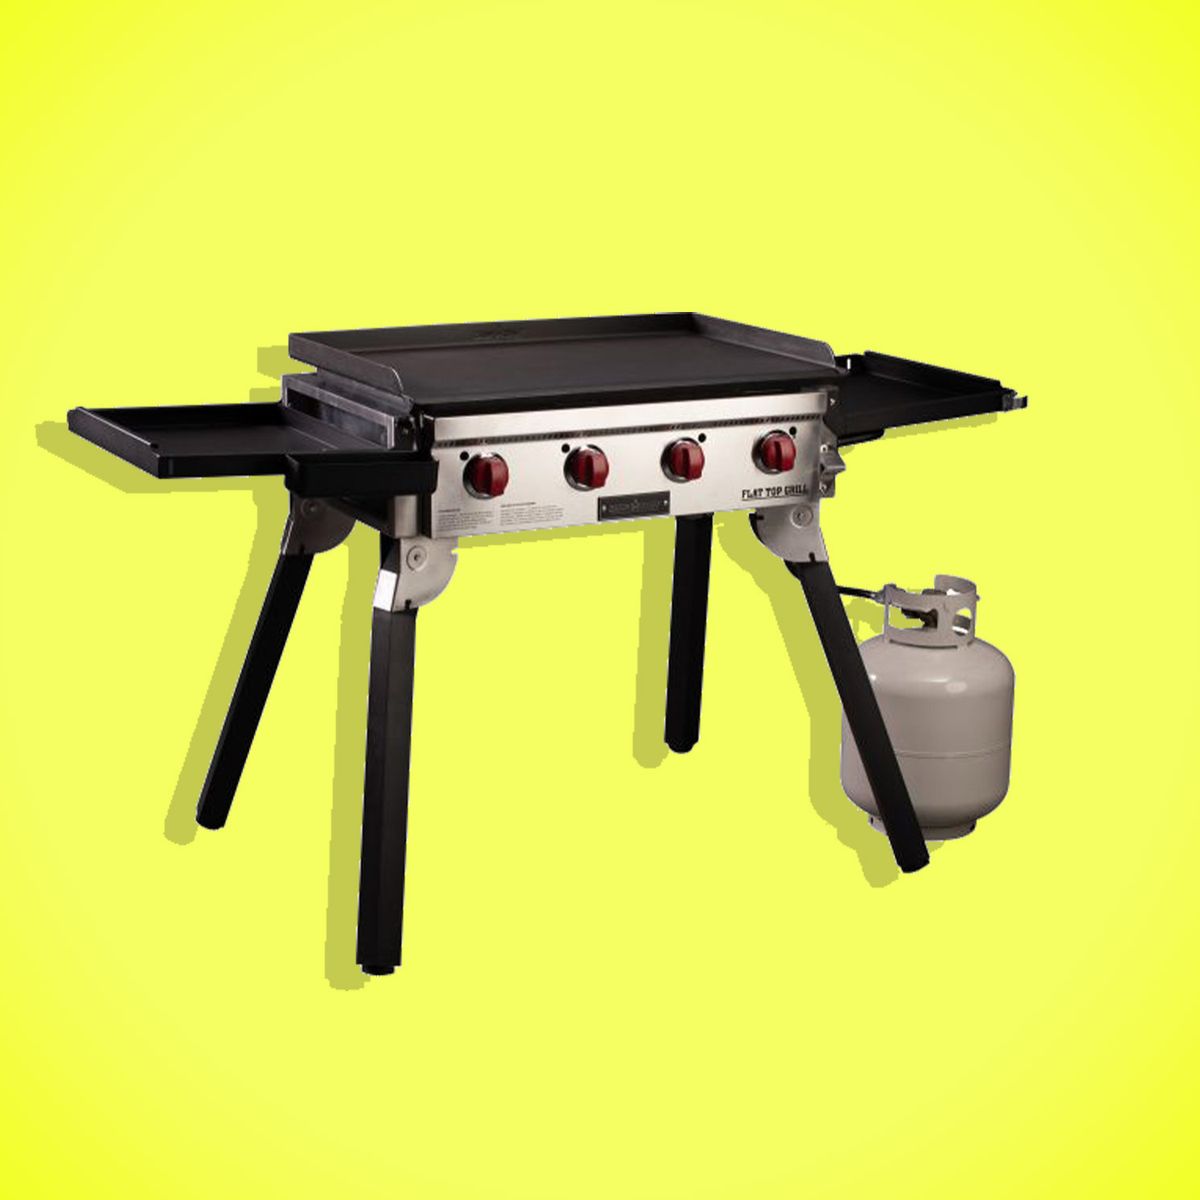 Camp Chef Portable Flat Top Grill 600, Outdoor Gas Flat Top Grill